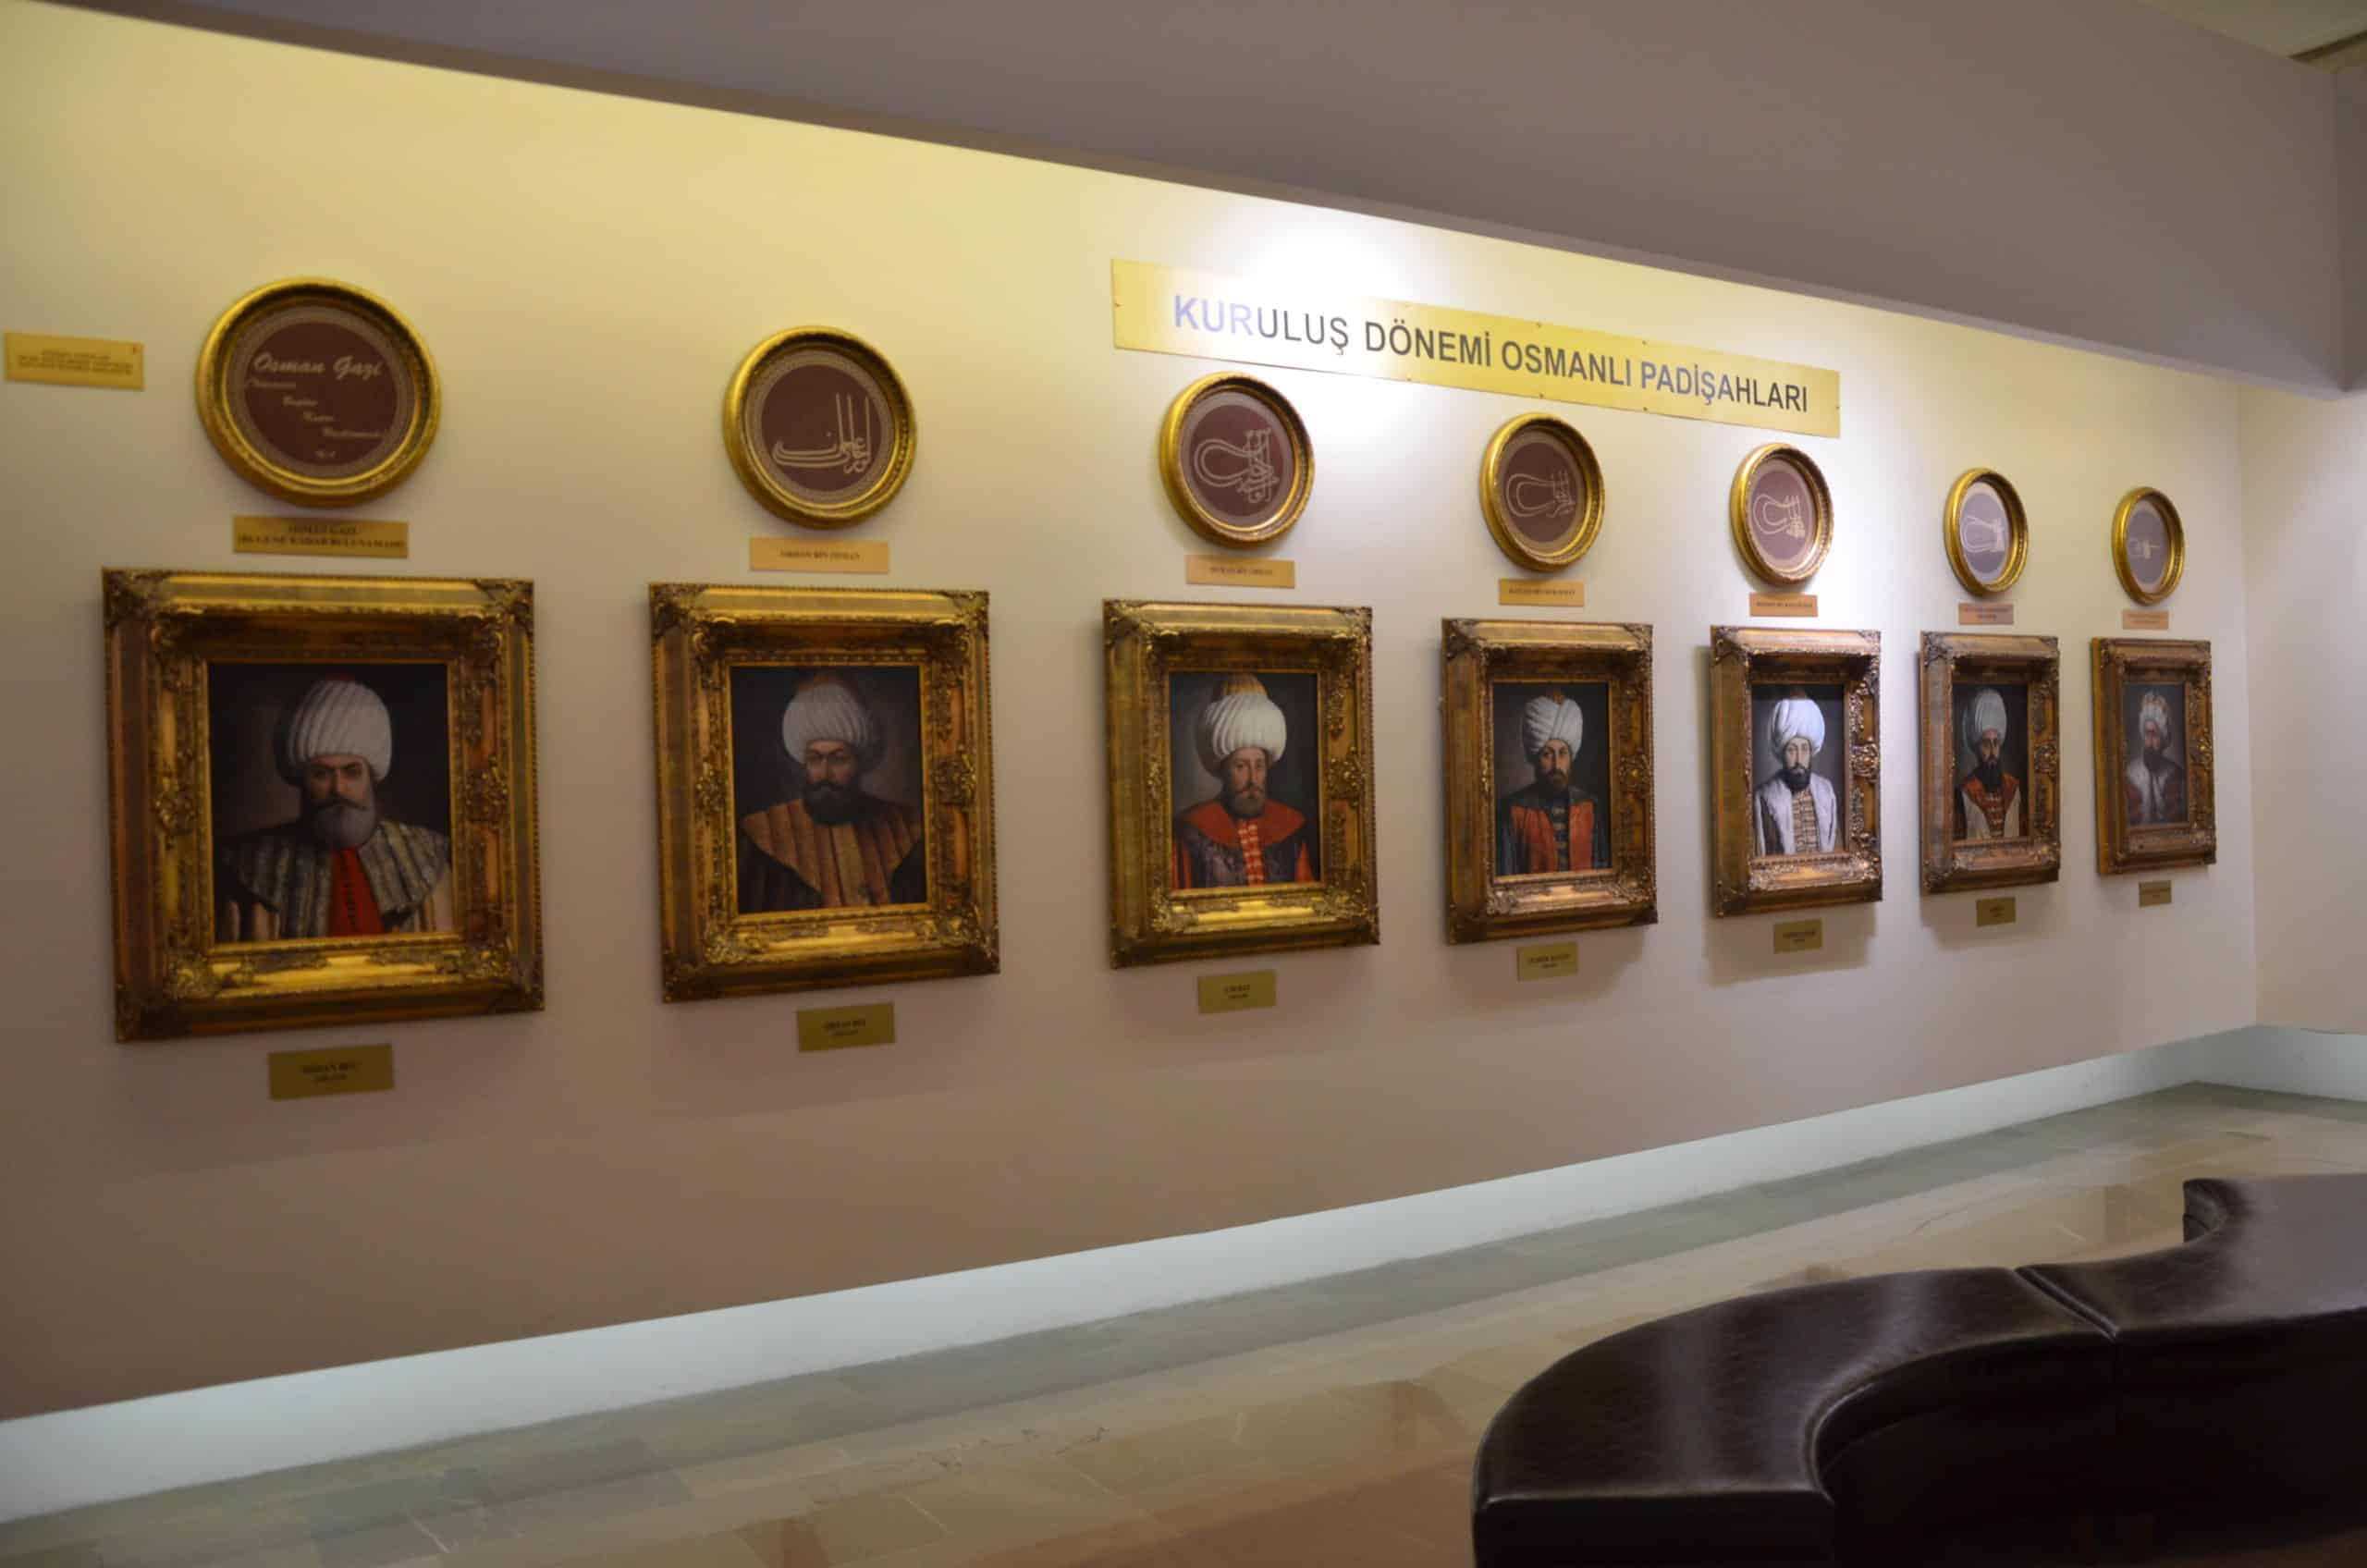 Portraits of the first Ottoman sultans at the Harbiye Military Museum in Istanbul, Turkey